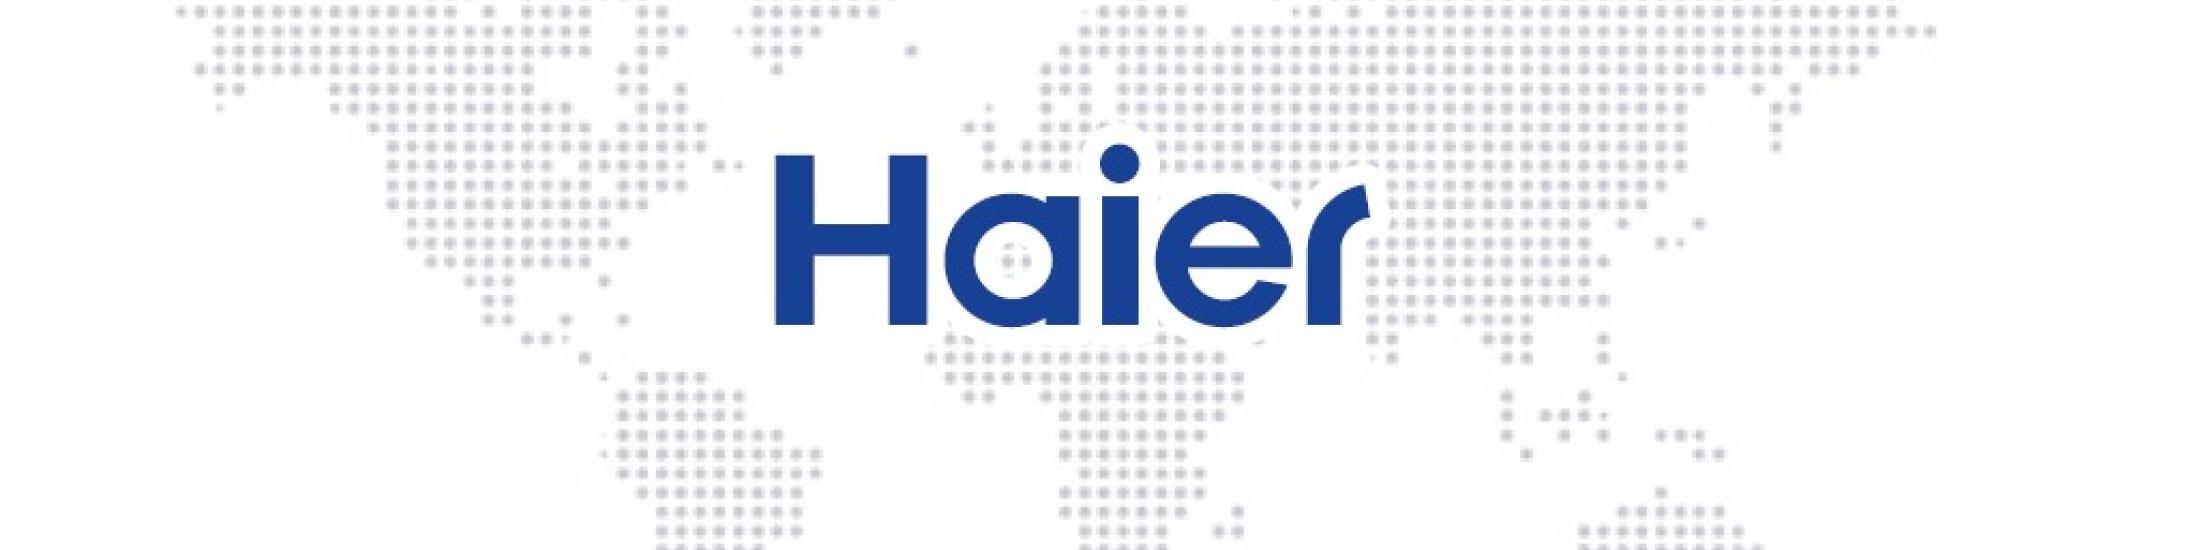 This winter Haier took a heartfelt stride to kindle warmth and connection.  Recognizing the often-overlooked yearning for belonging among… | Instagram